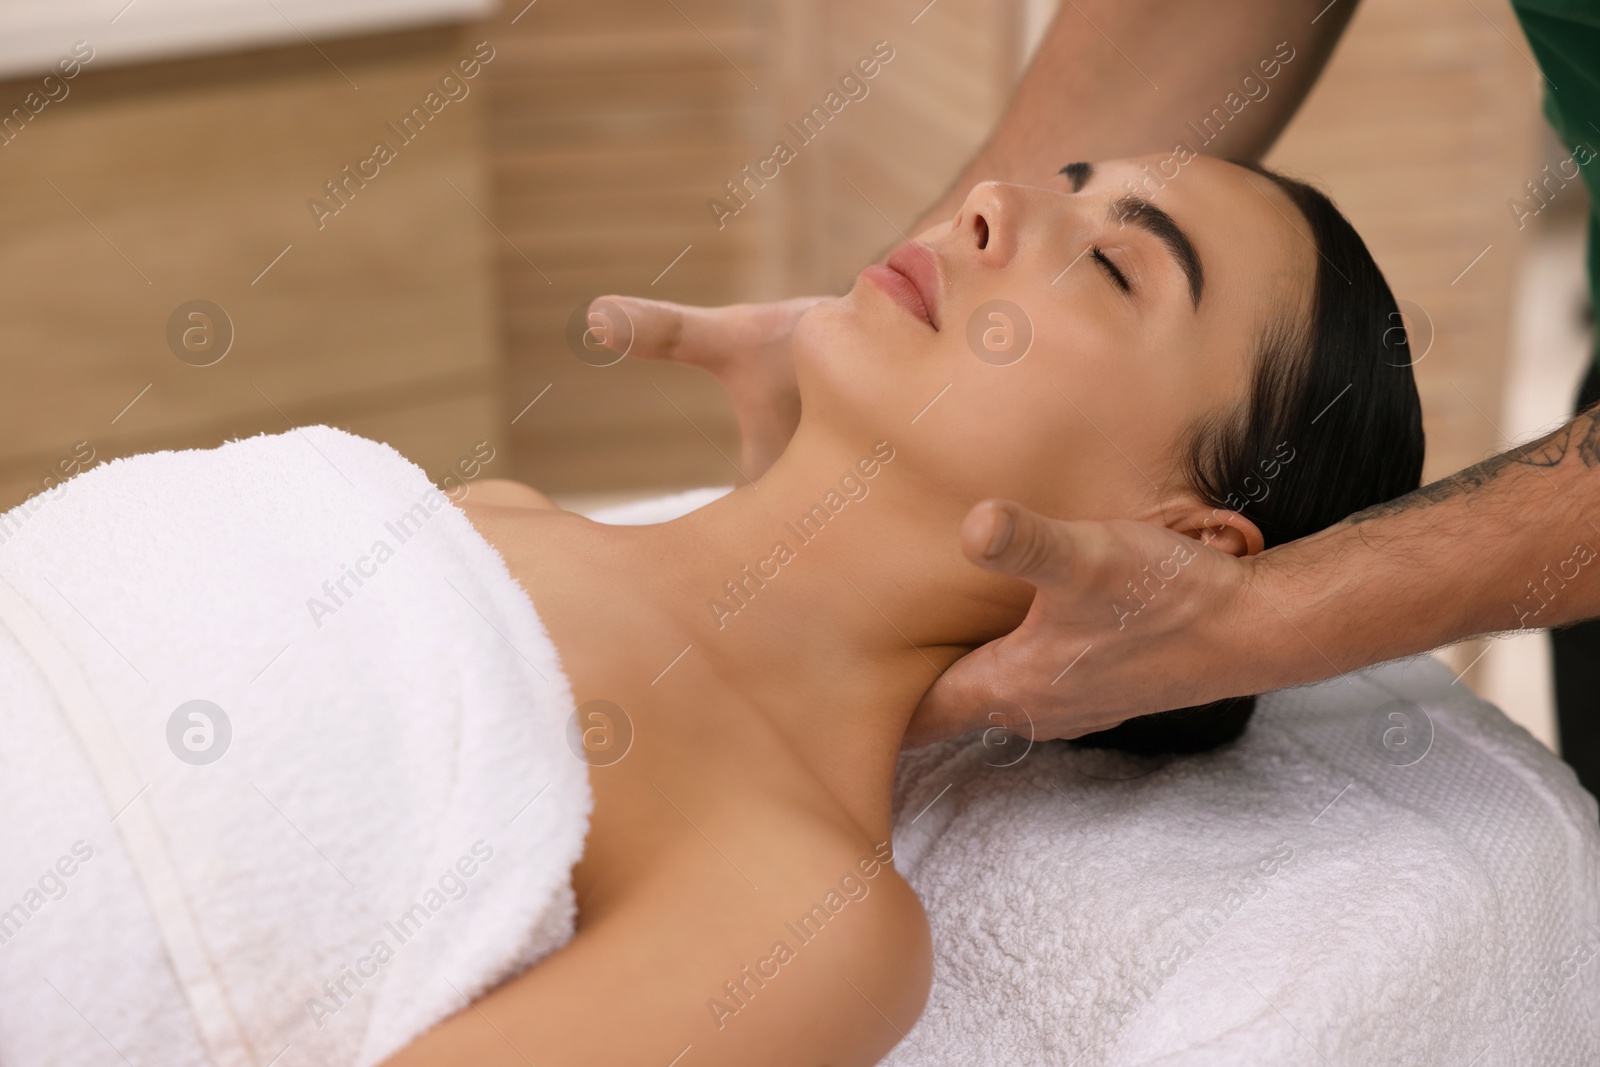 Photo of Woman receiving professional neck massage on couch indoors